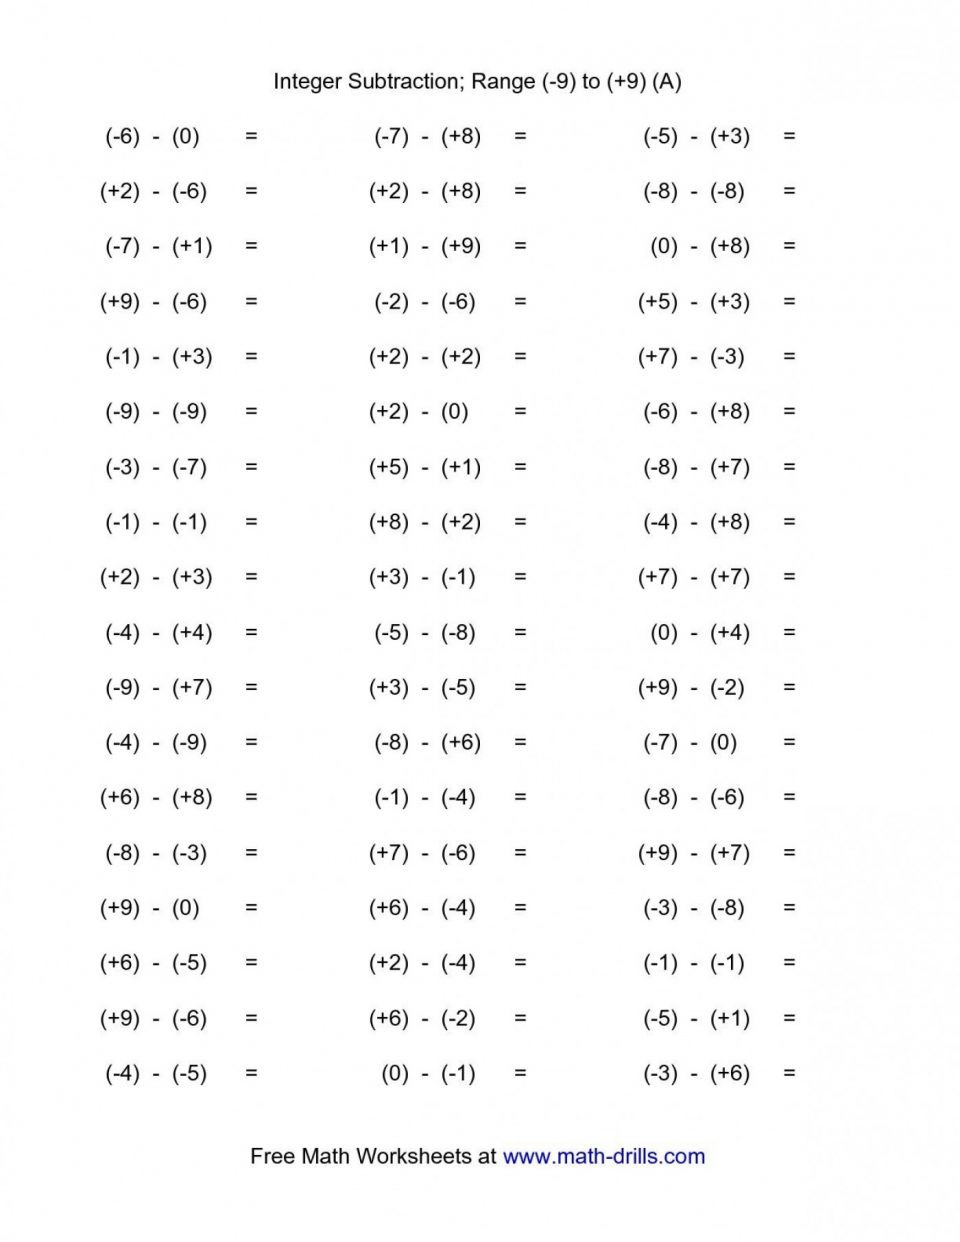 16-best-images-of-adding-integers-worksheets-7th-grade-with-answer-key